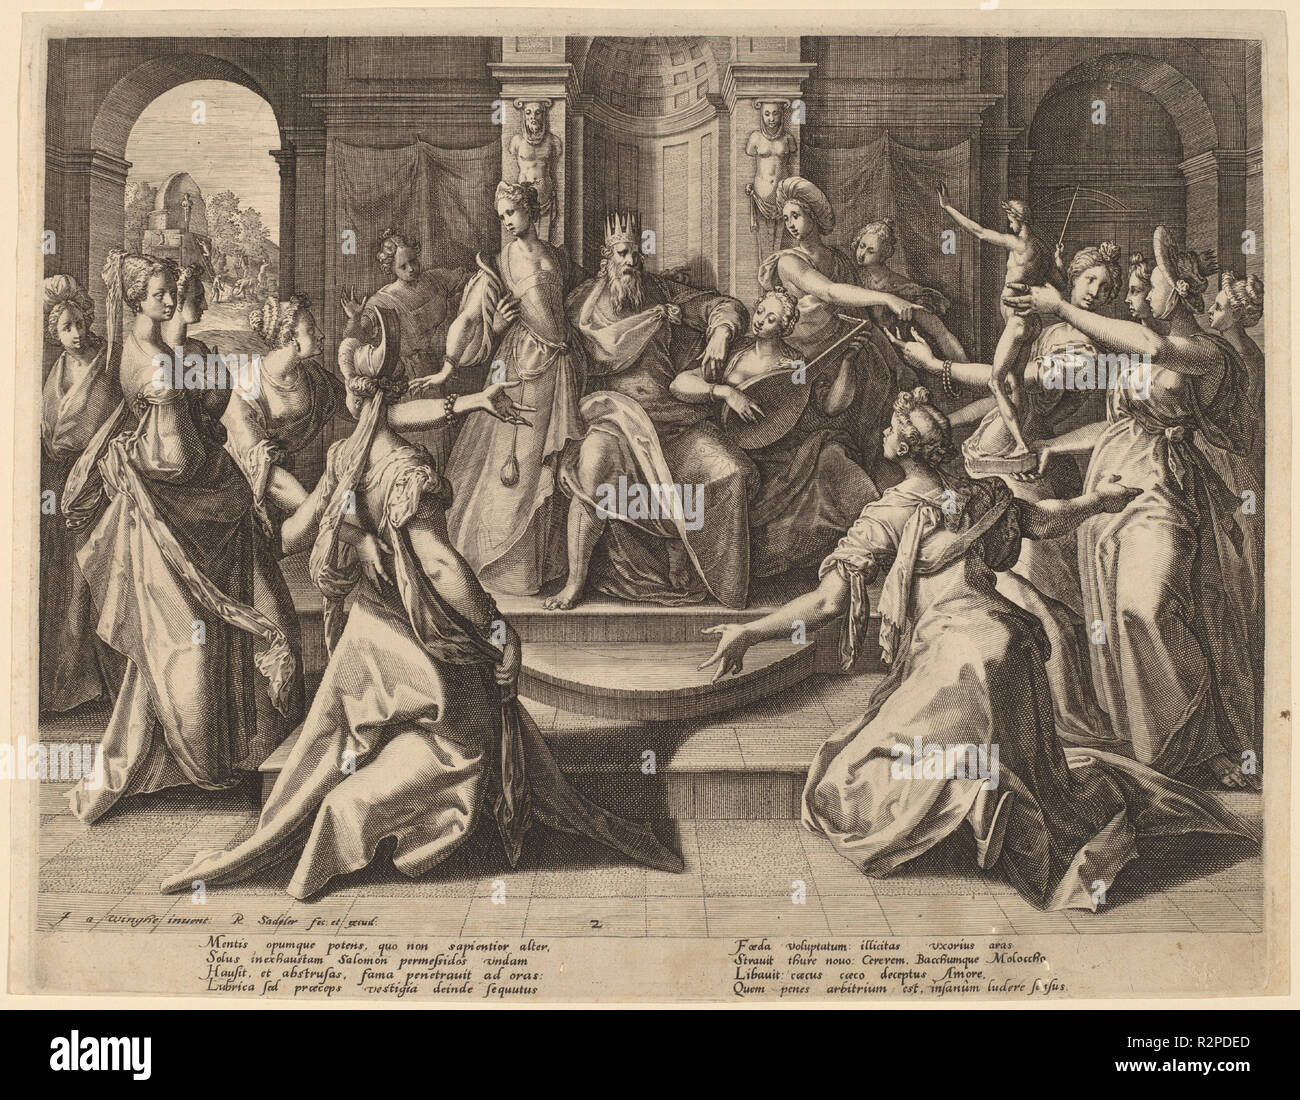 Solomon Led to Idolatry by His Wives. Dated: 1589. Dimensions: plate: 22.6  x 28.9 cm (8 7/8 x 11 3/8 in.) overall (external frame dimensions): 59.7 x  44.5 cm (23 1/2 x